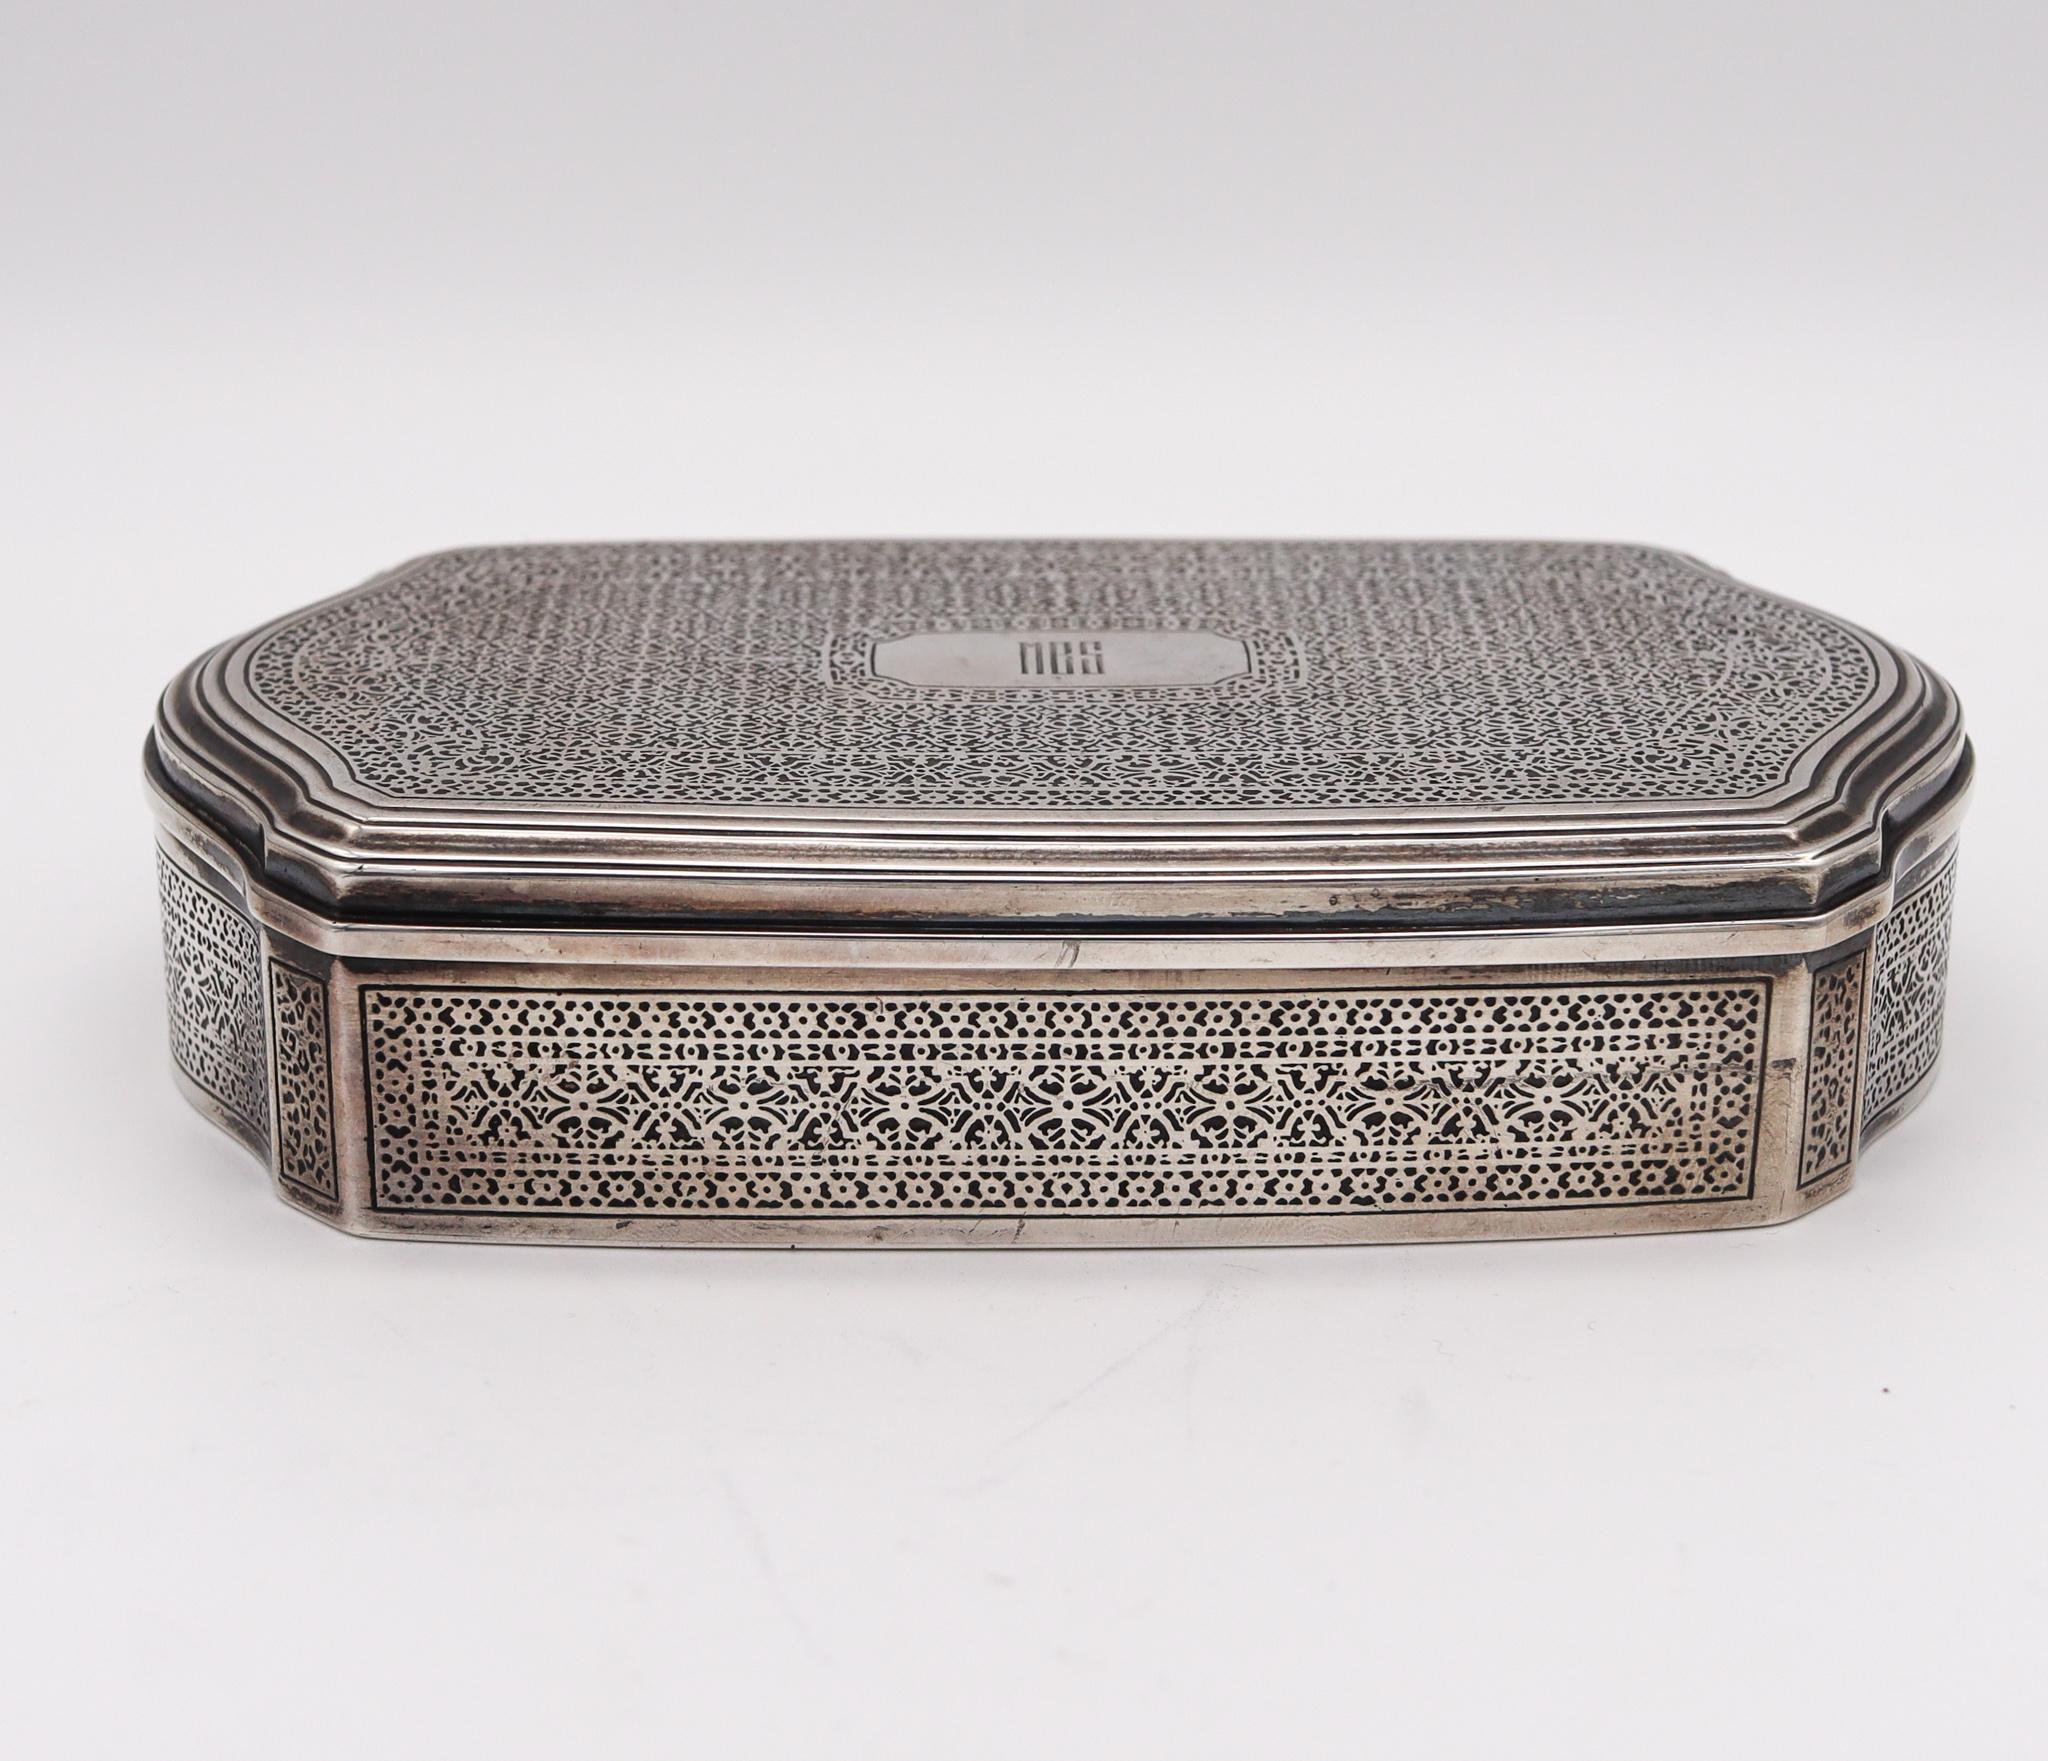 Tiffany & Co. 1927 Art Deco Chiseled Arabesque Box with Lid .925 Sterling Silver 3